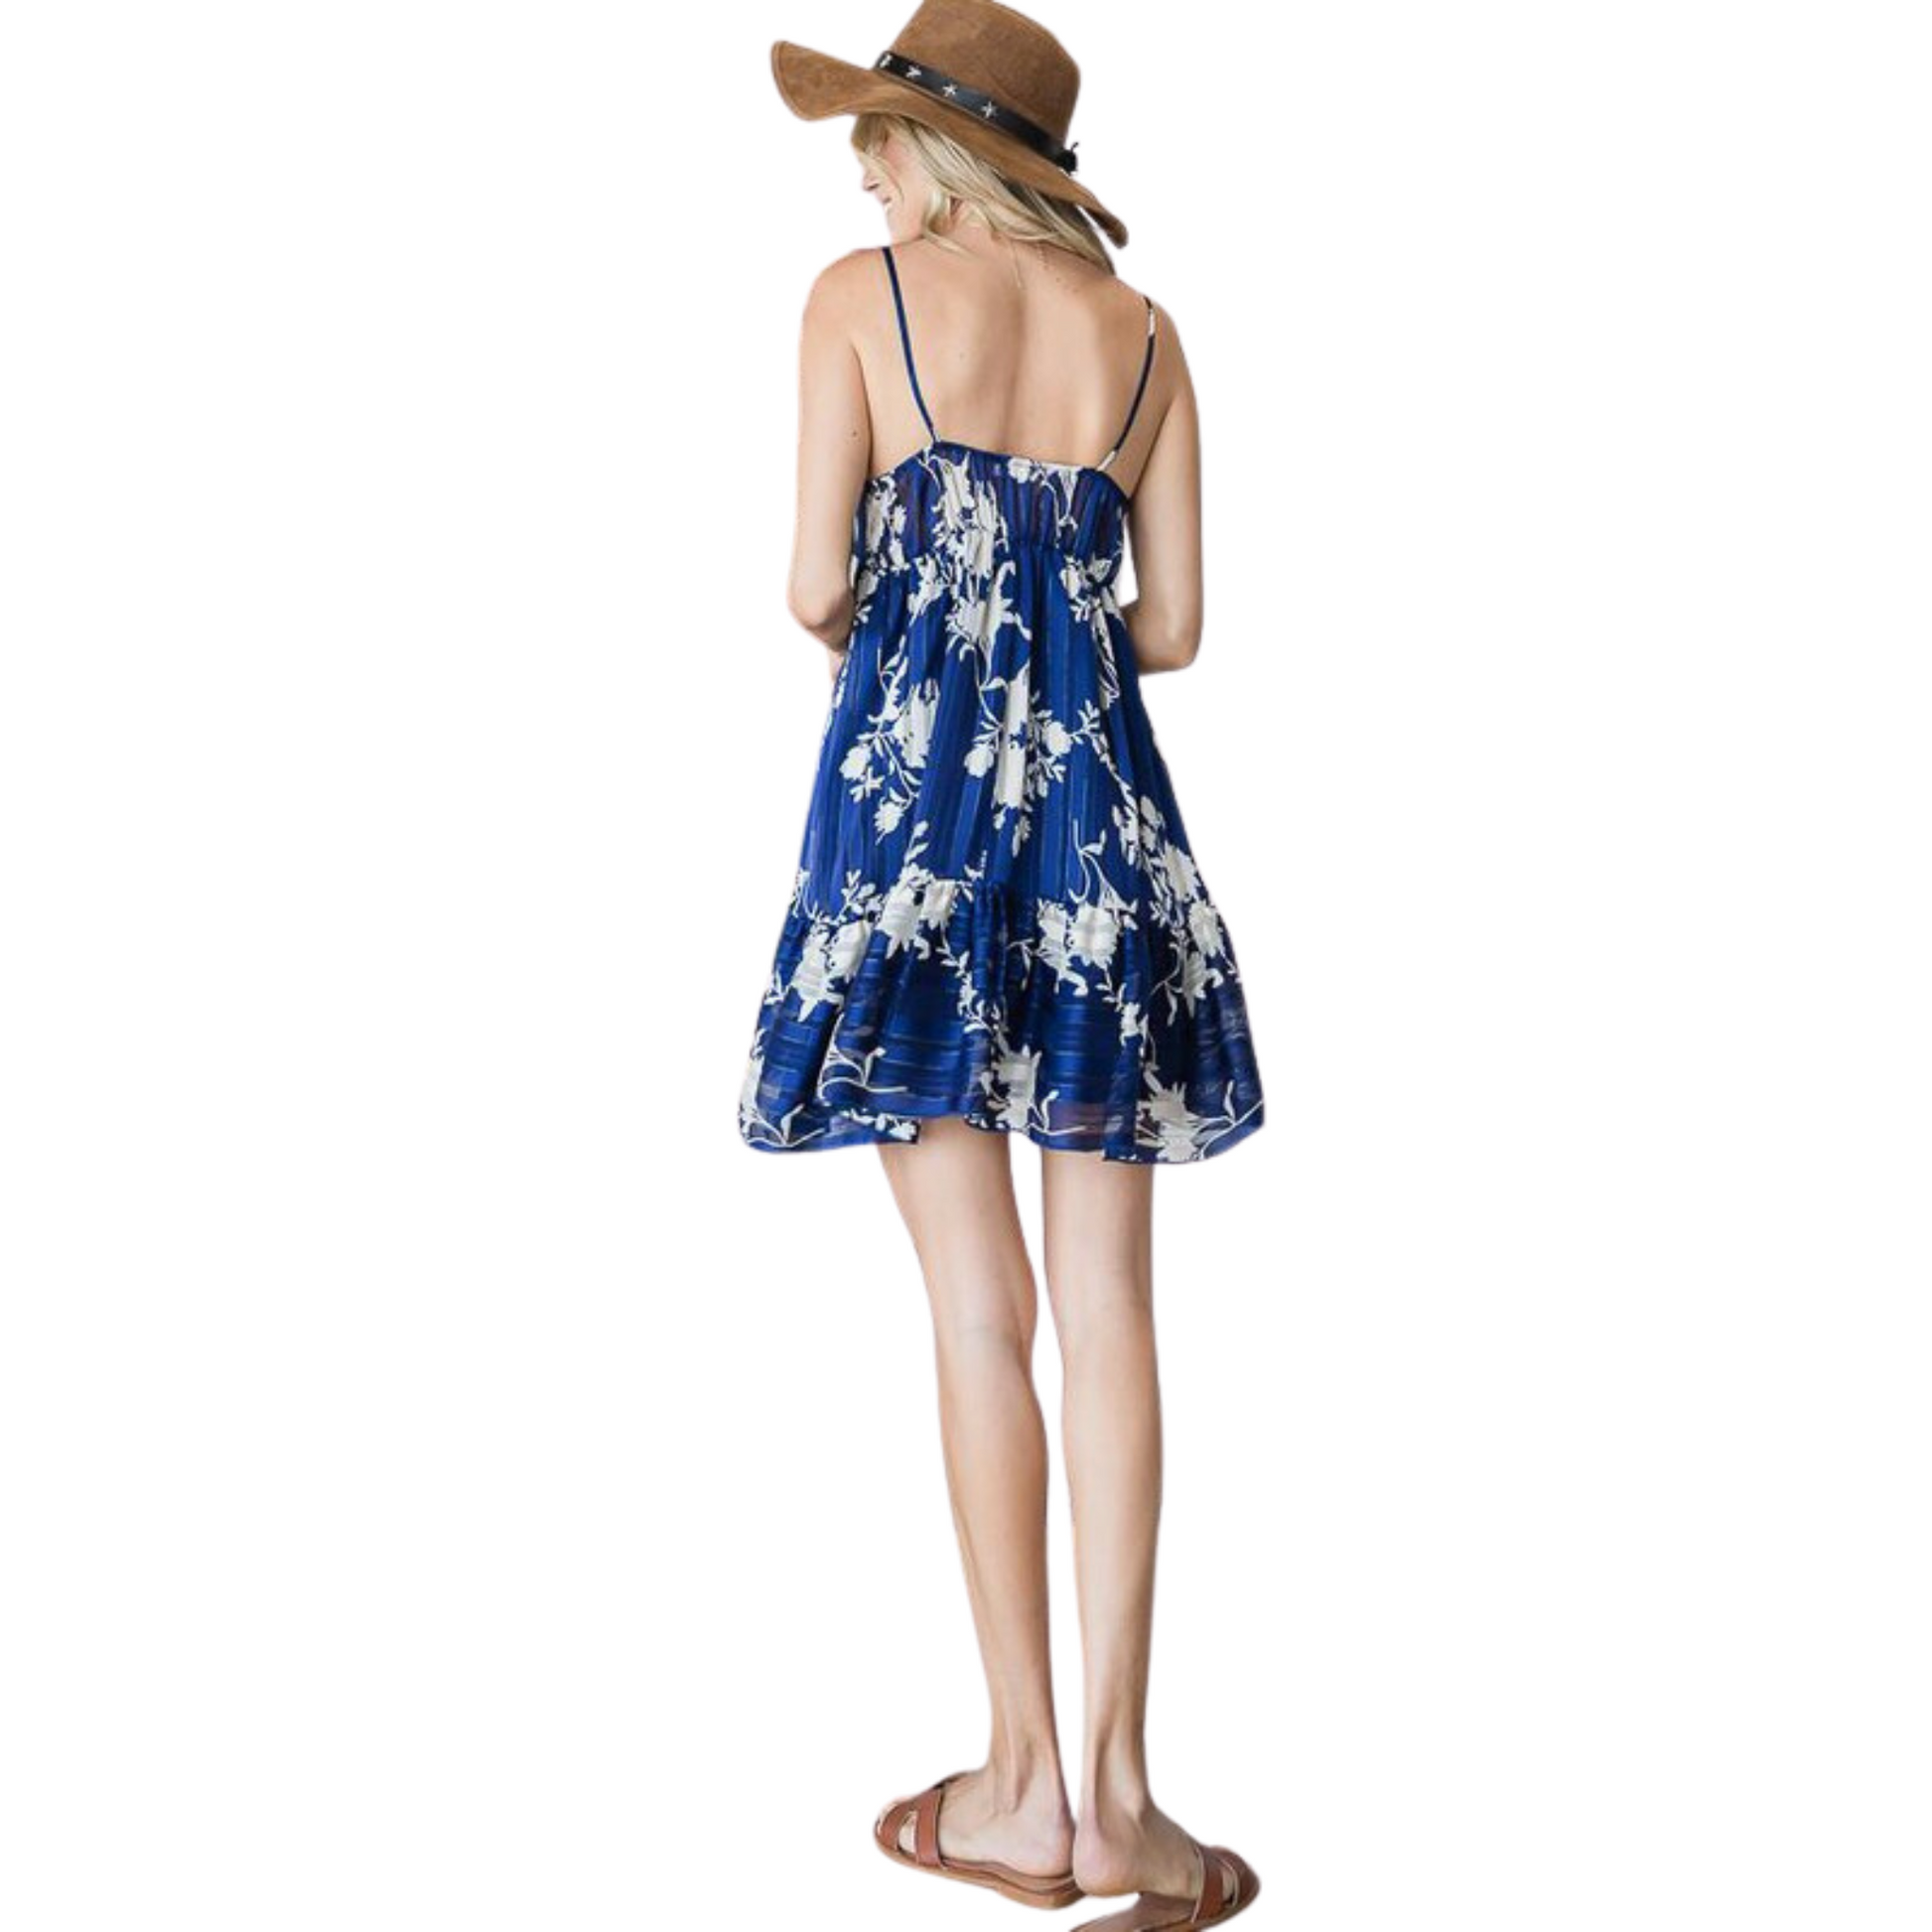 This Floral Chiffon Empire Dress will have you looking your best. It features a spaghetti strap and mini dress cut in a bold blue color. Perfect for any formal occasions, its stylish design will let you stand out in the crowd.